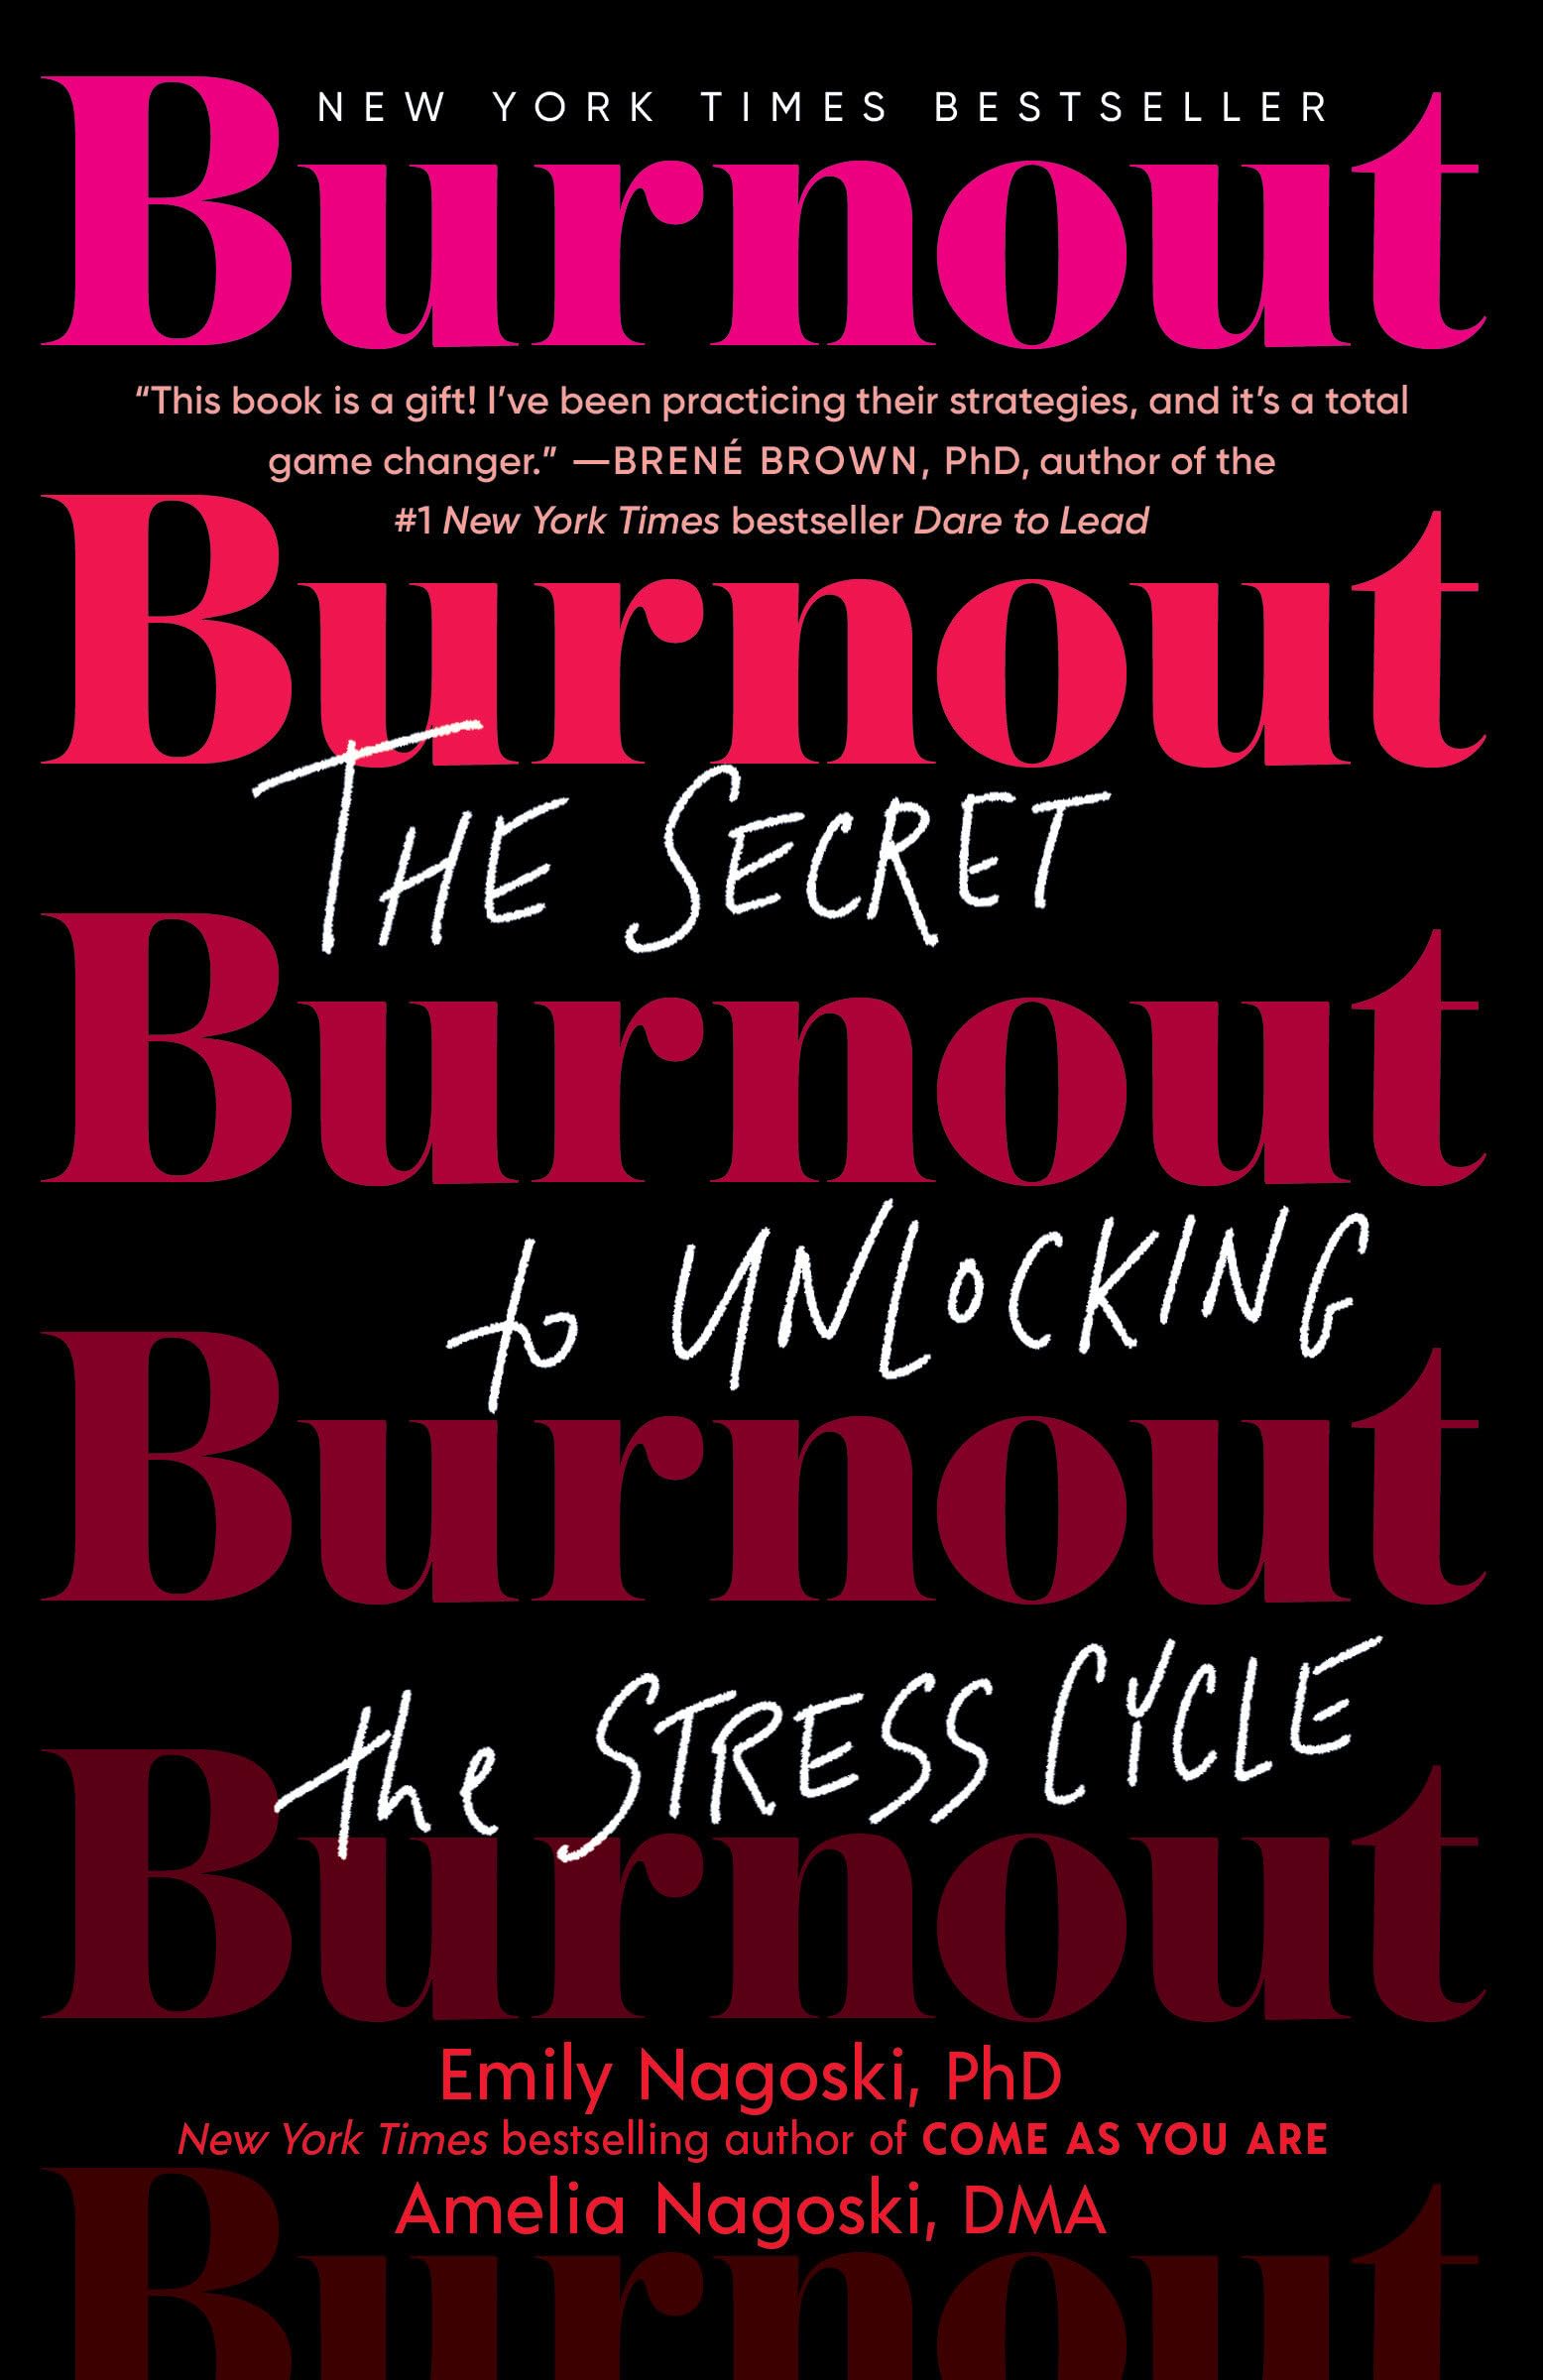 Burnout: The Secret to Unlocking the Stress Cycle by Nagoski, Emily